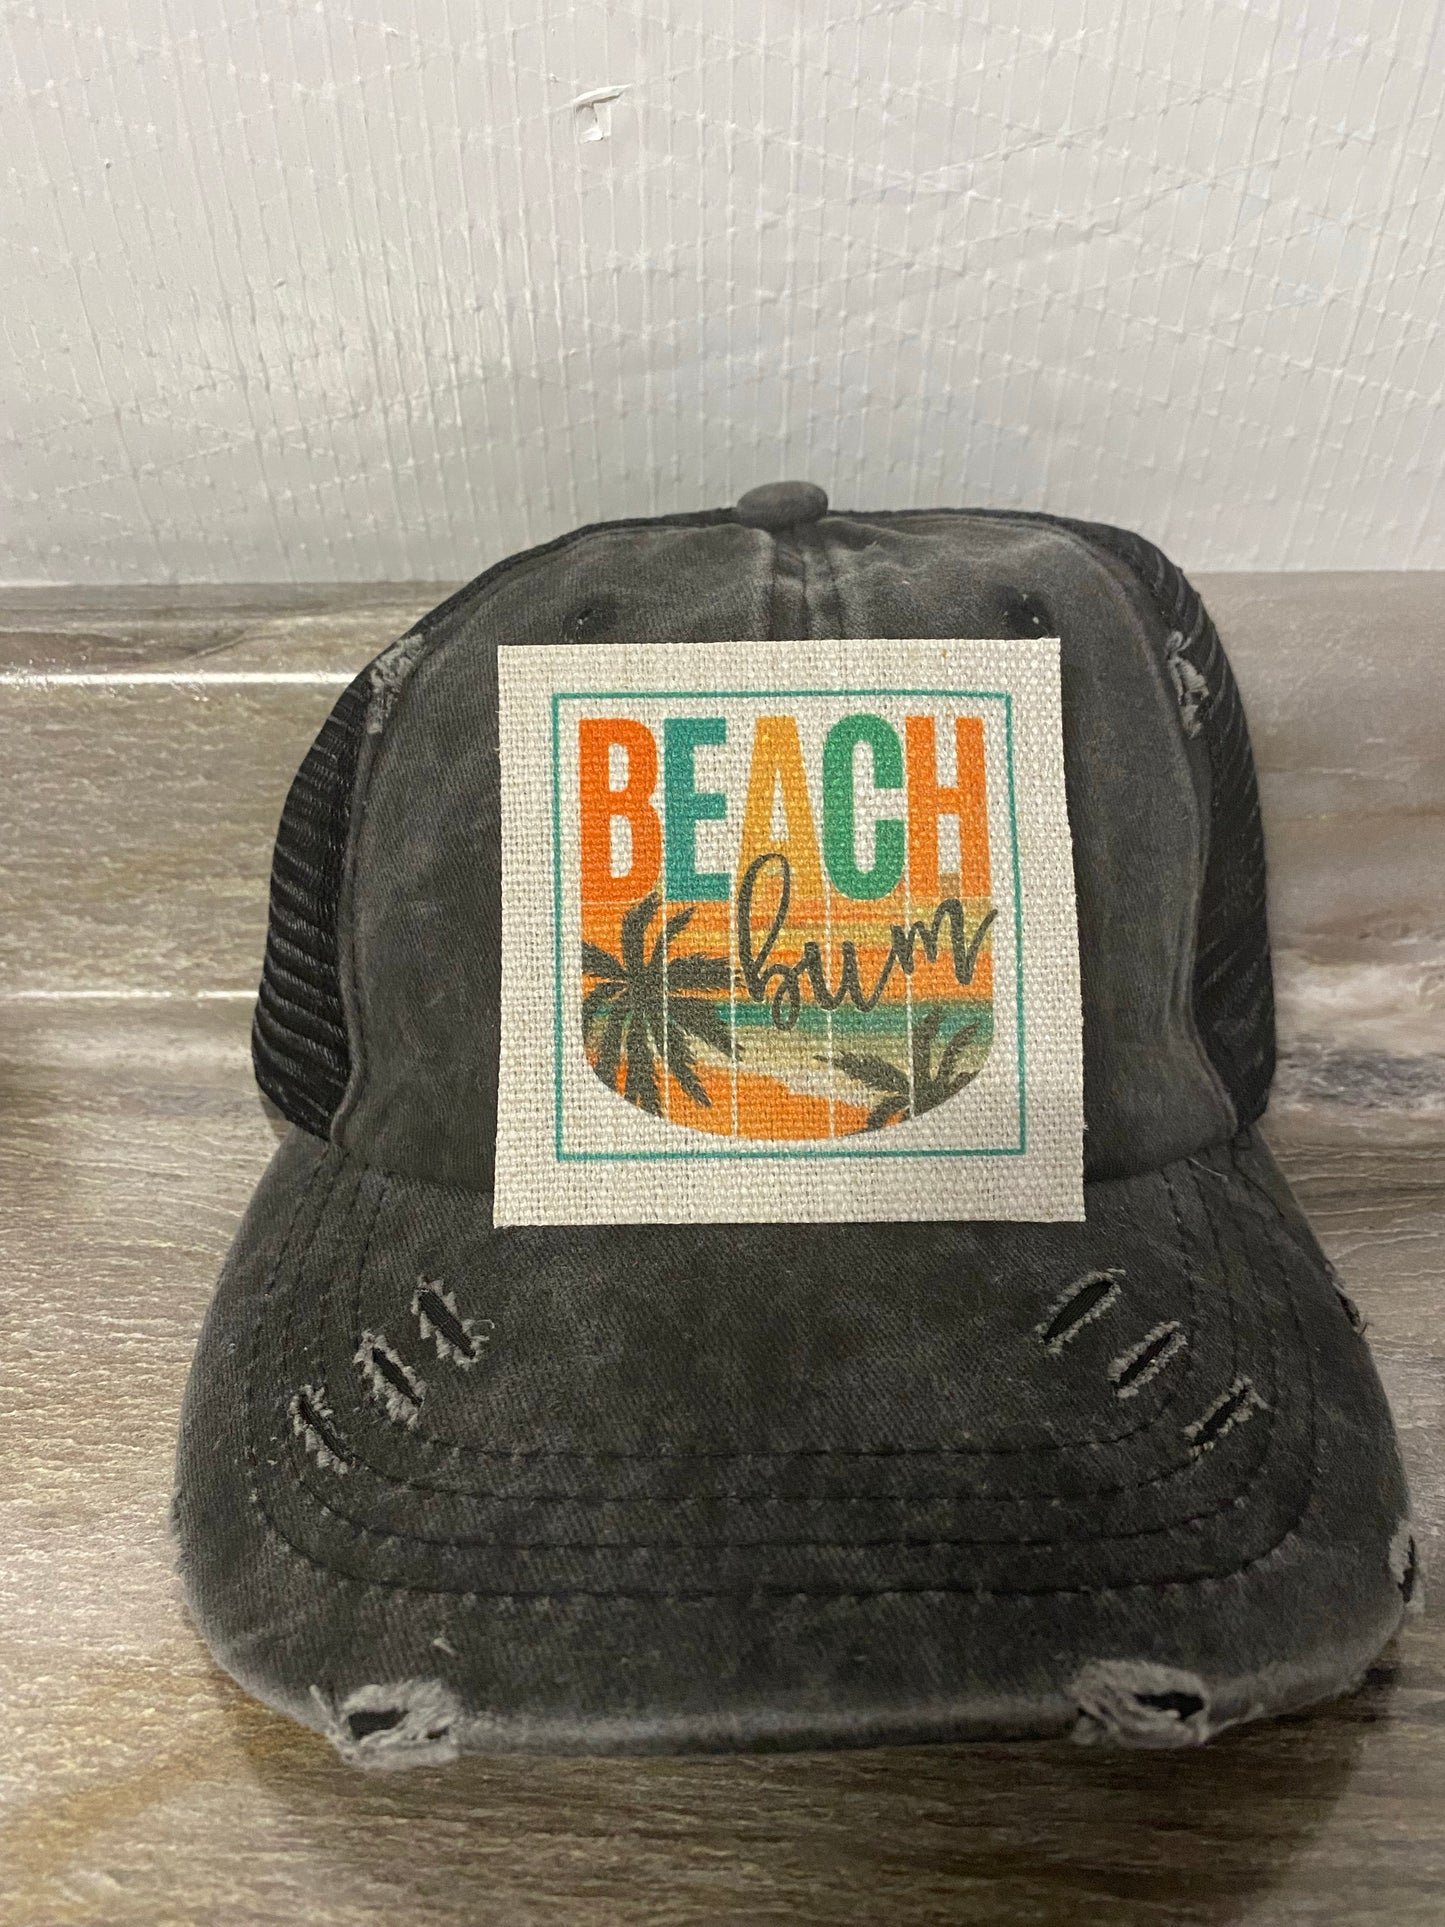 Beach Bum with Sunset Hat Patch